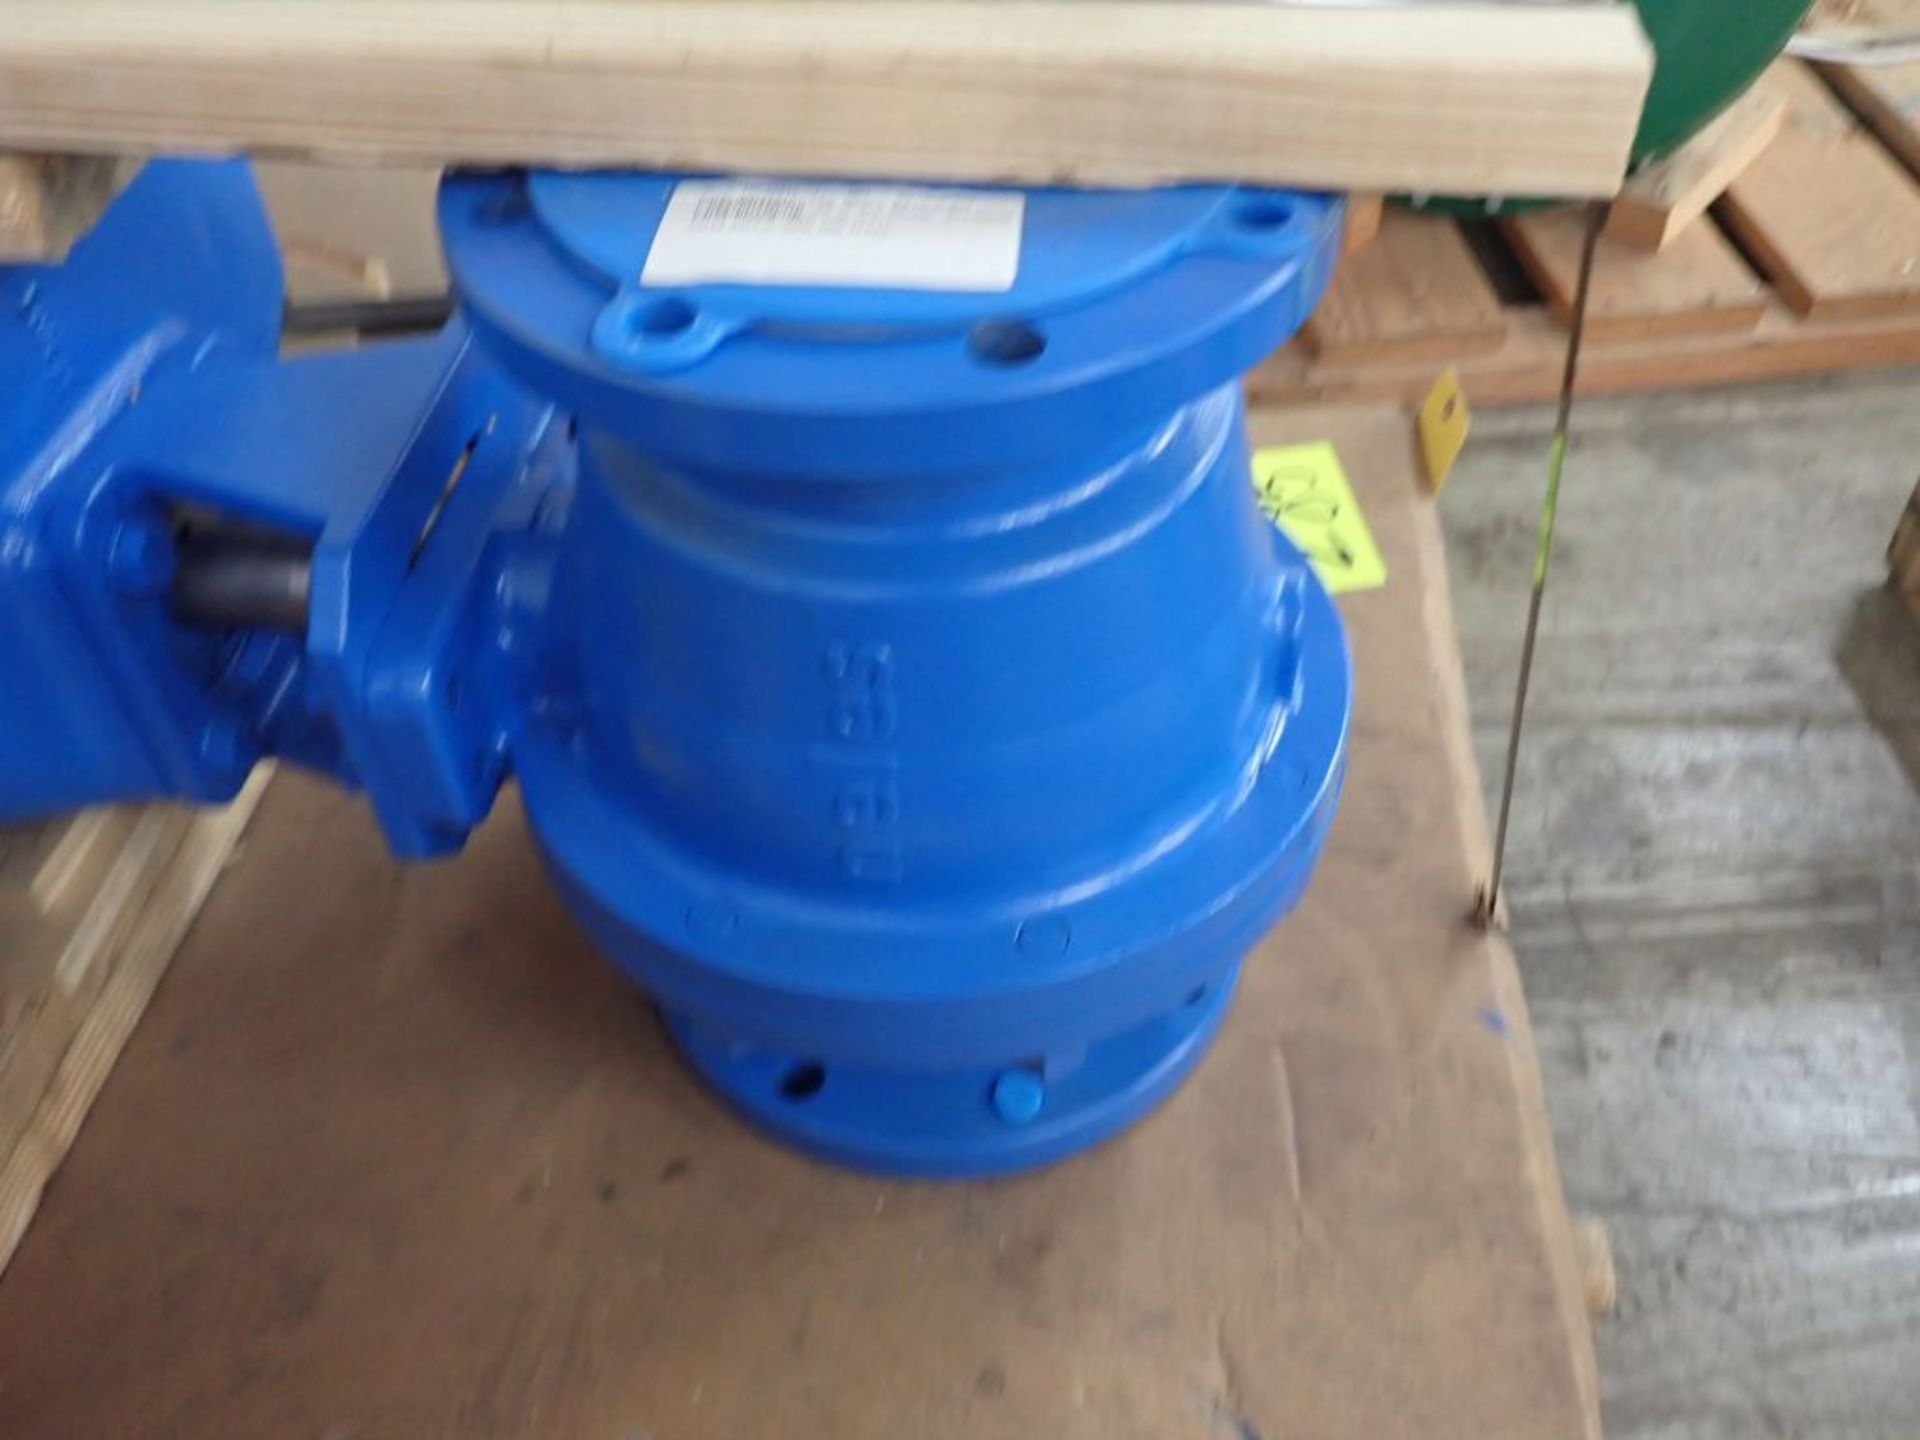 Metso Ball Valve Assembly - Bin No. 3D9D4C; Size: 6"; Tag: 215809 - Image 4 of 7